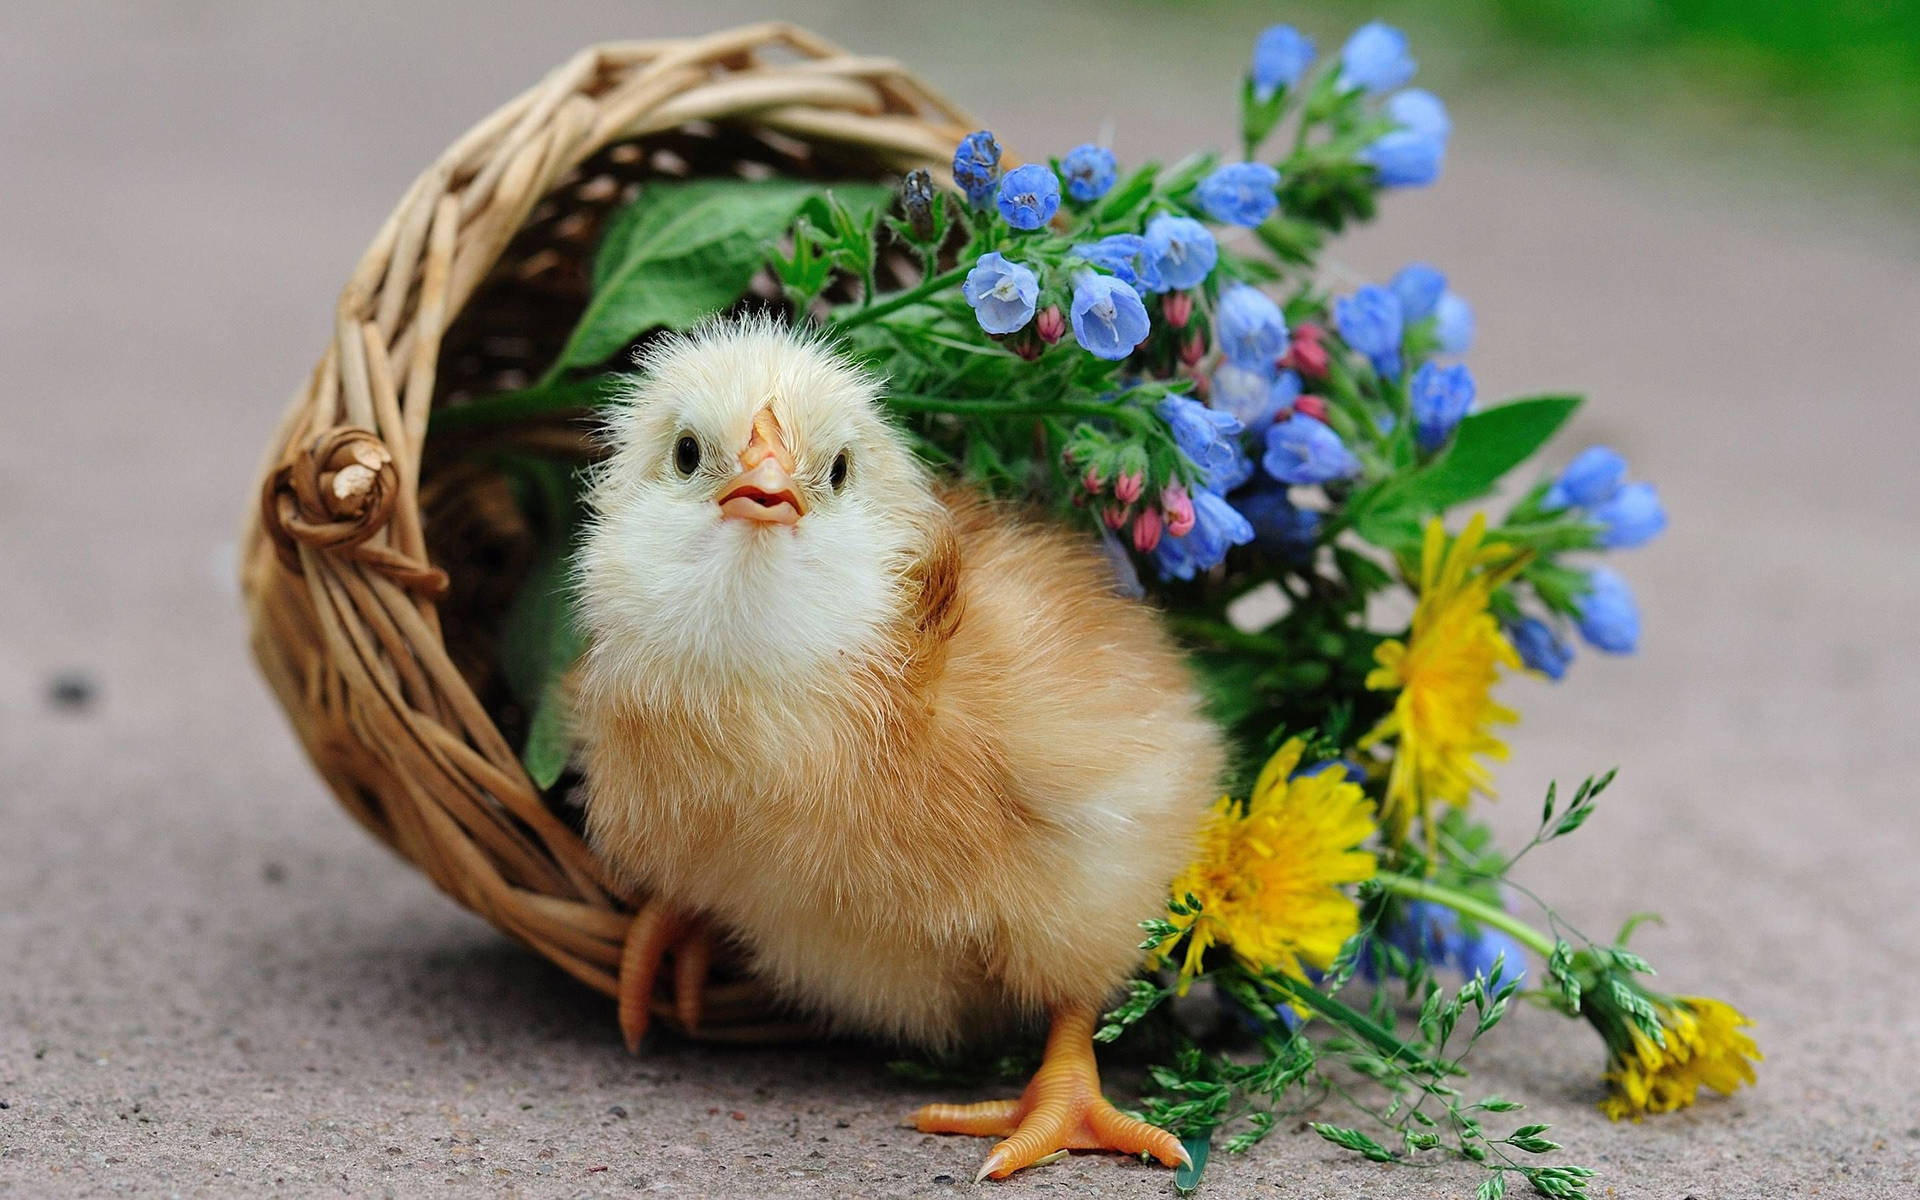 A Darling Little Chick Enjoying Some Springtime Weather Background